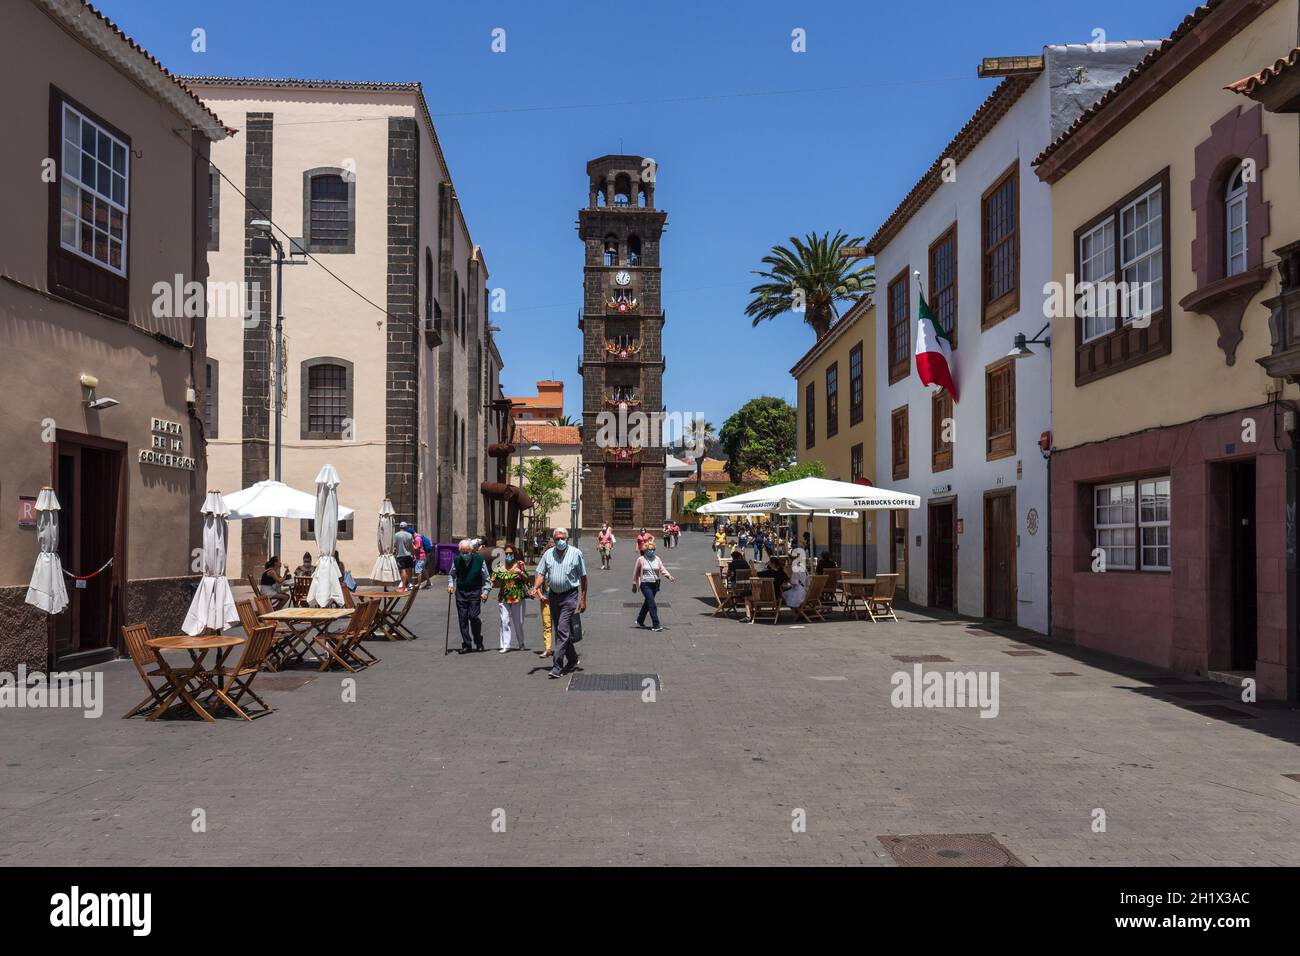 SAN CRISTOBAL DE LA LAGUNA, CANARY ISLANDS, TENERIFE - JULY 03, 2021: Street in the historic city center. In the background, the bell tower of the Chu Stock Photo